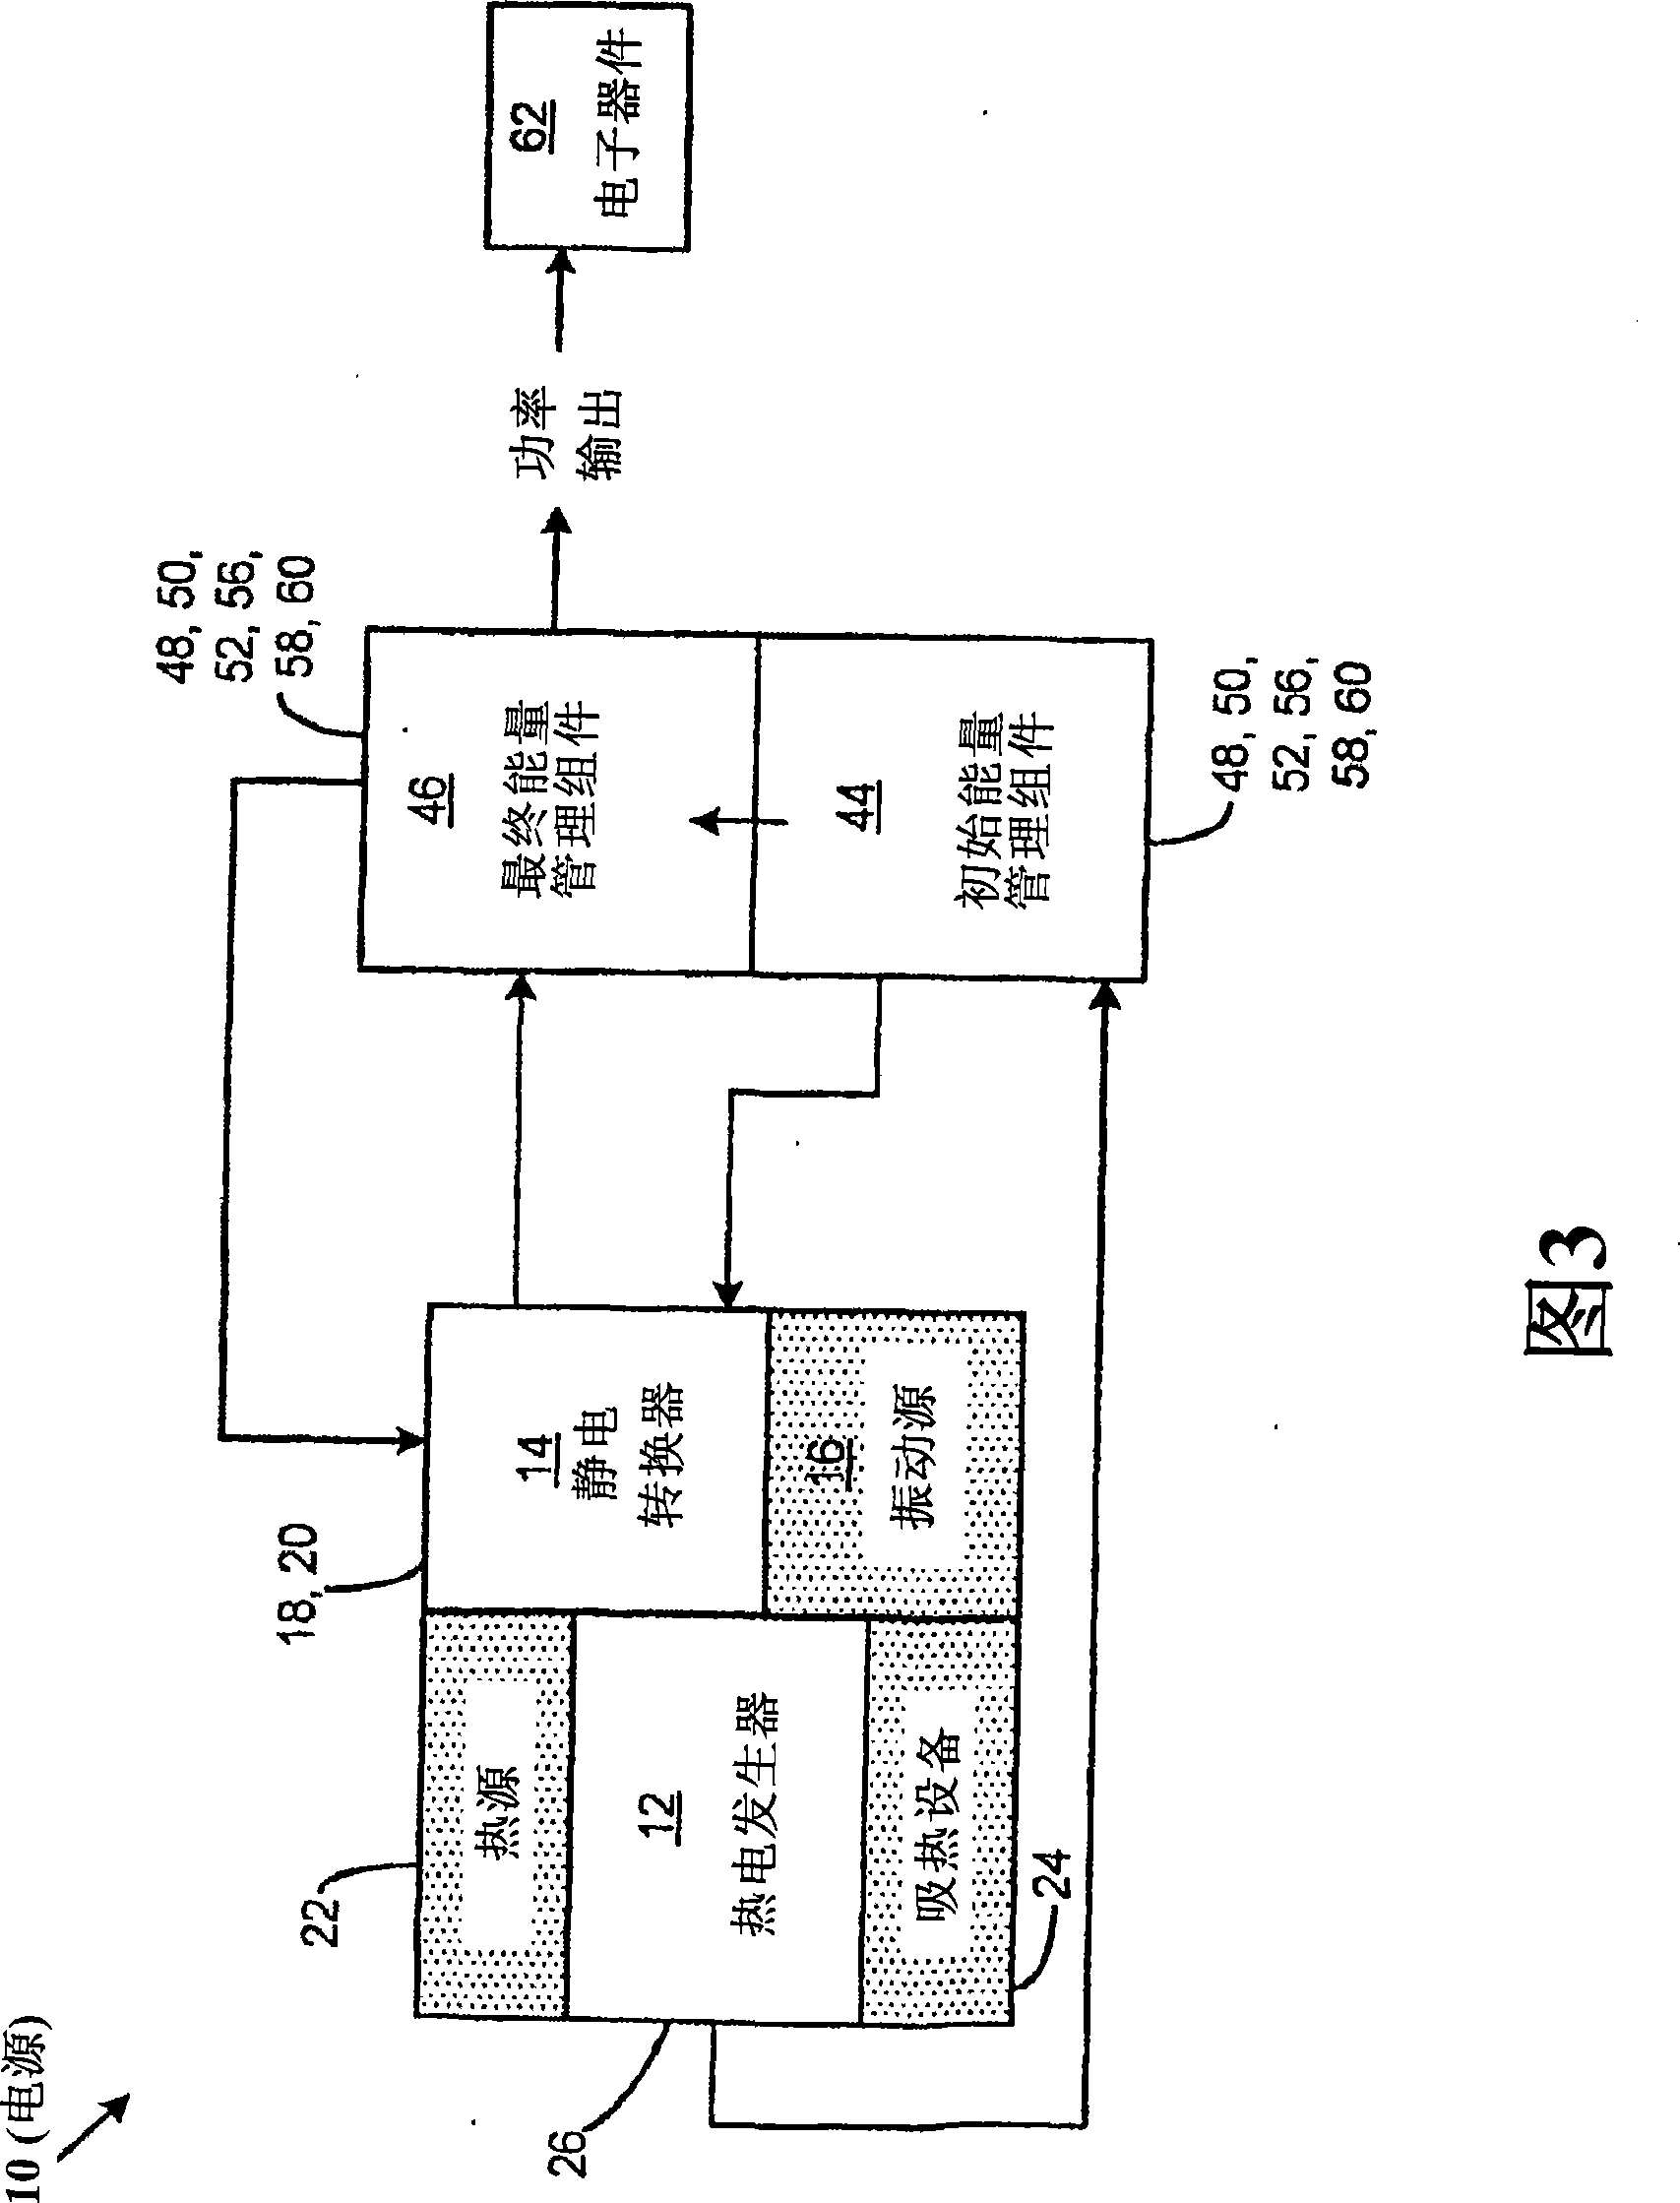 Thermoelectric generator with micro-electrostatic energy converter